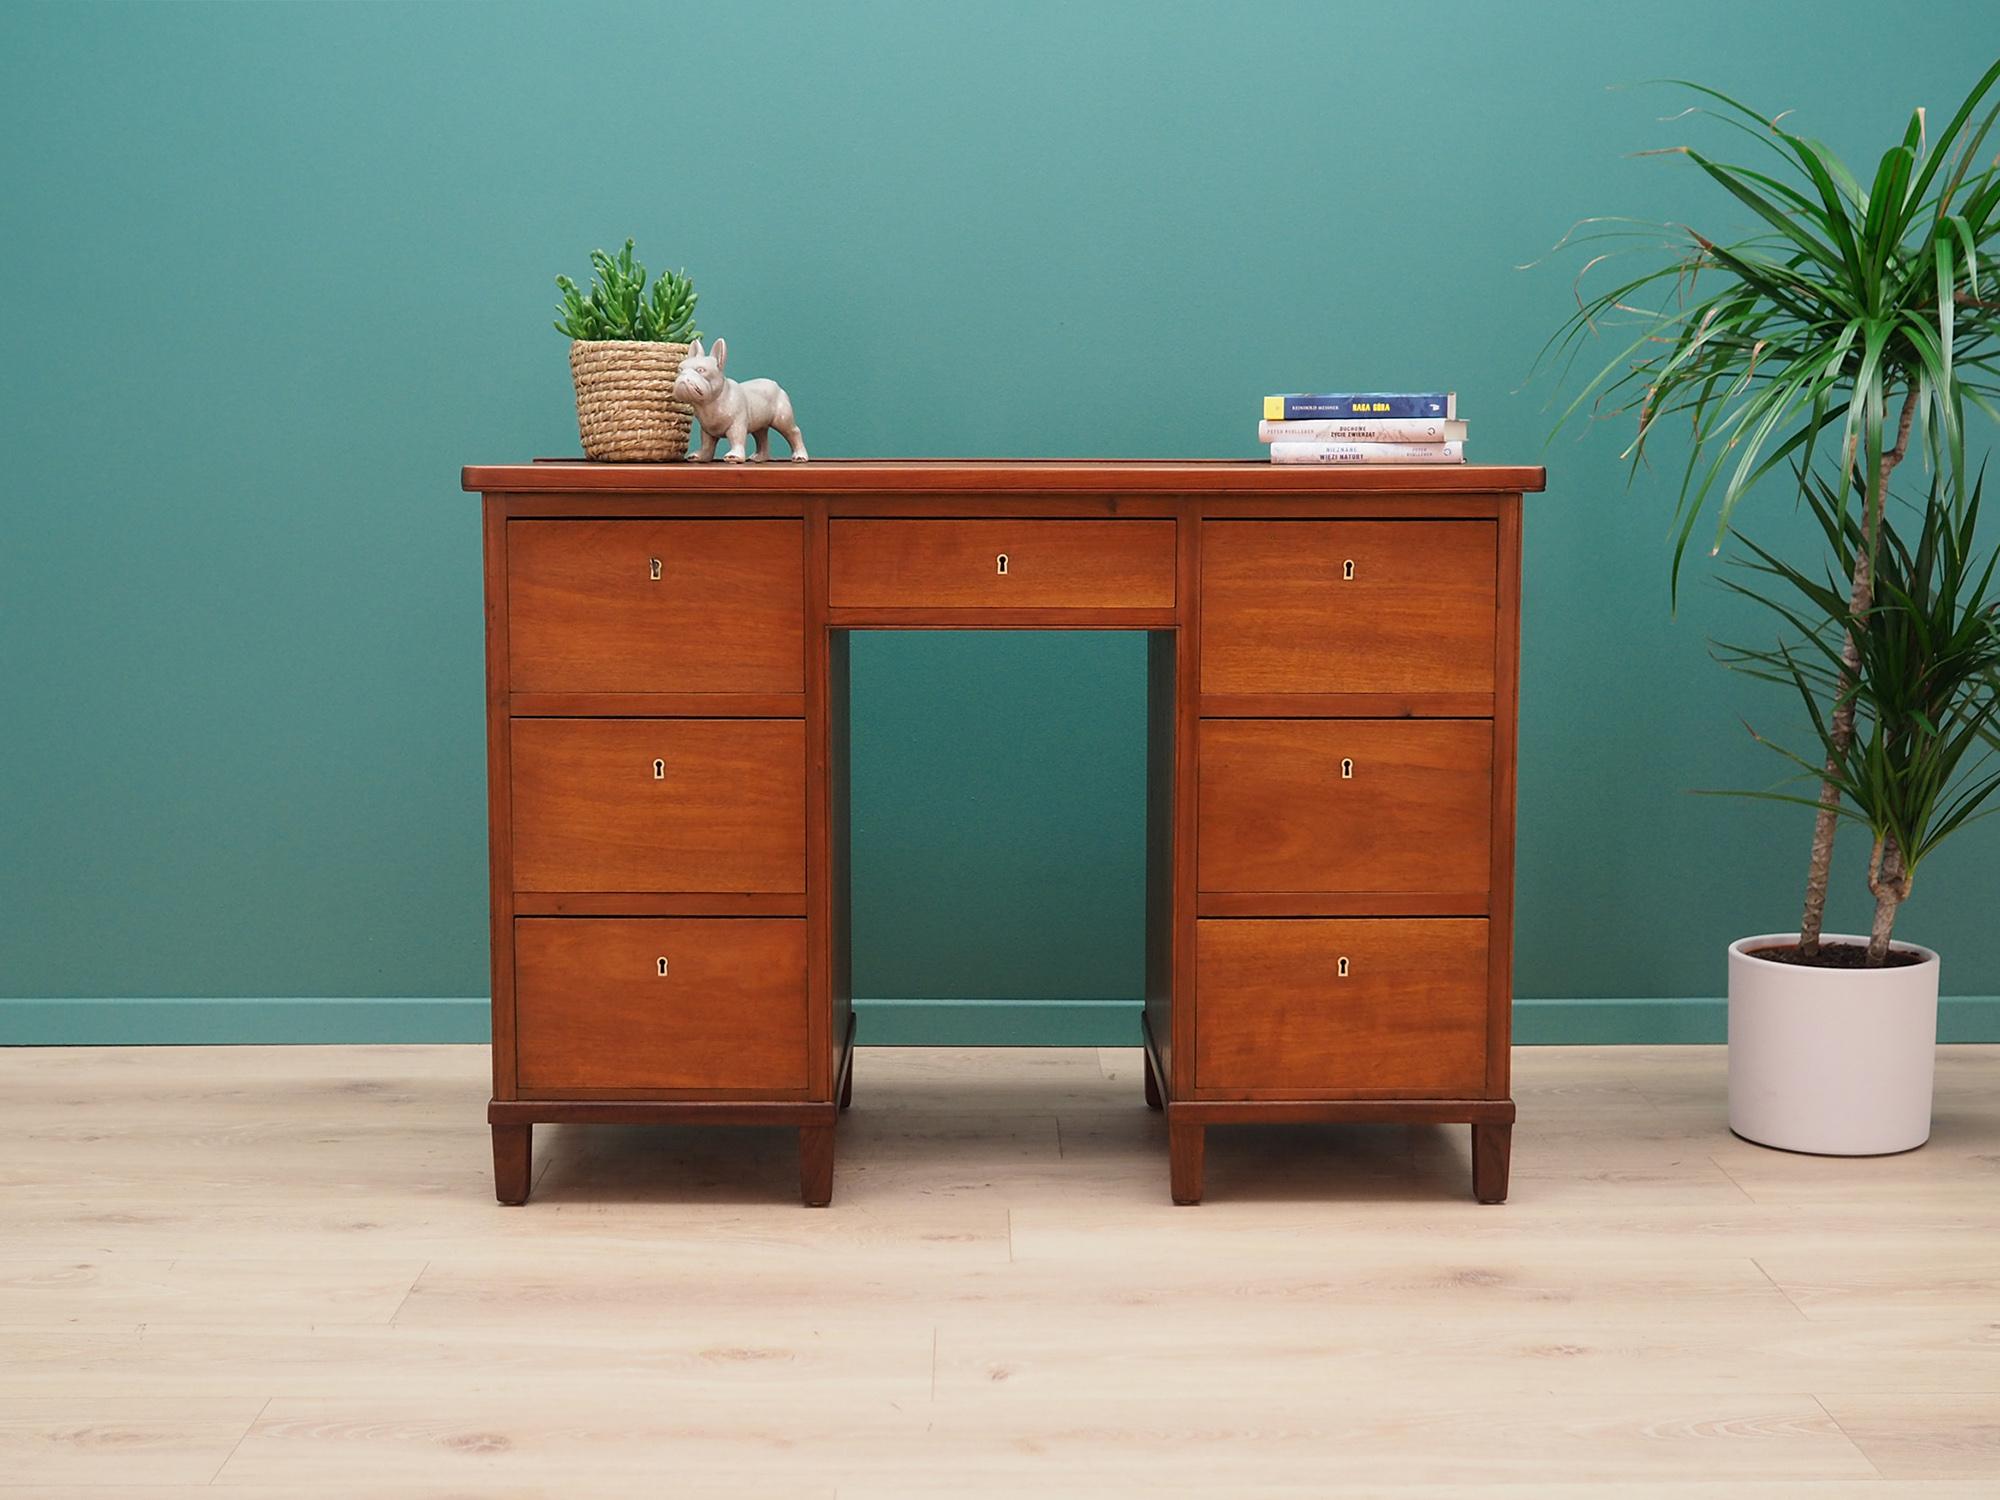 Sensational desk from the 1960s-1970s. Minimalist form, Scandinavian design. The furniture is covered with teak veneer, legs are made of solid teak wood. The desk has seven spacious drawers and a key included. Preserved in good condition (small